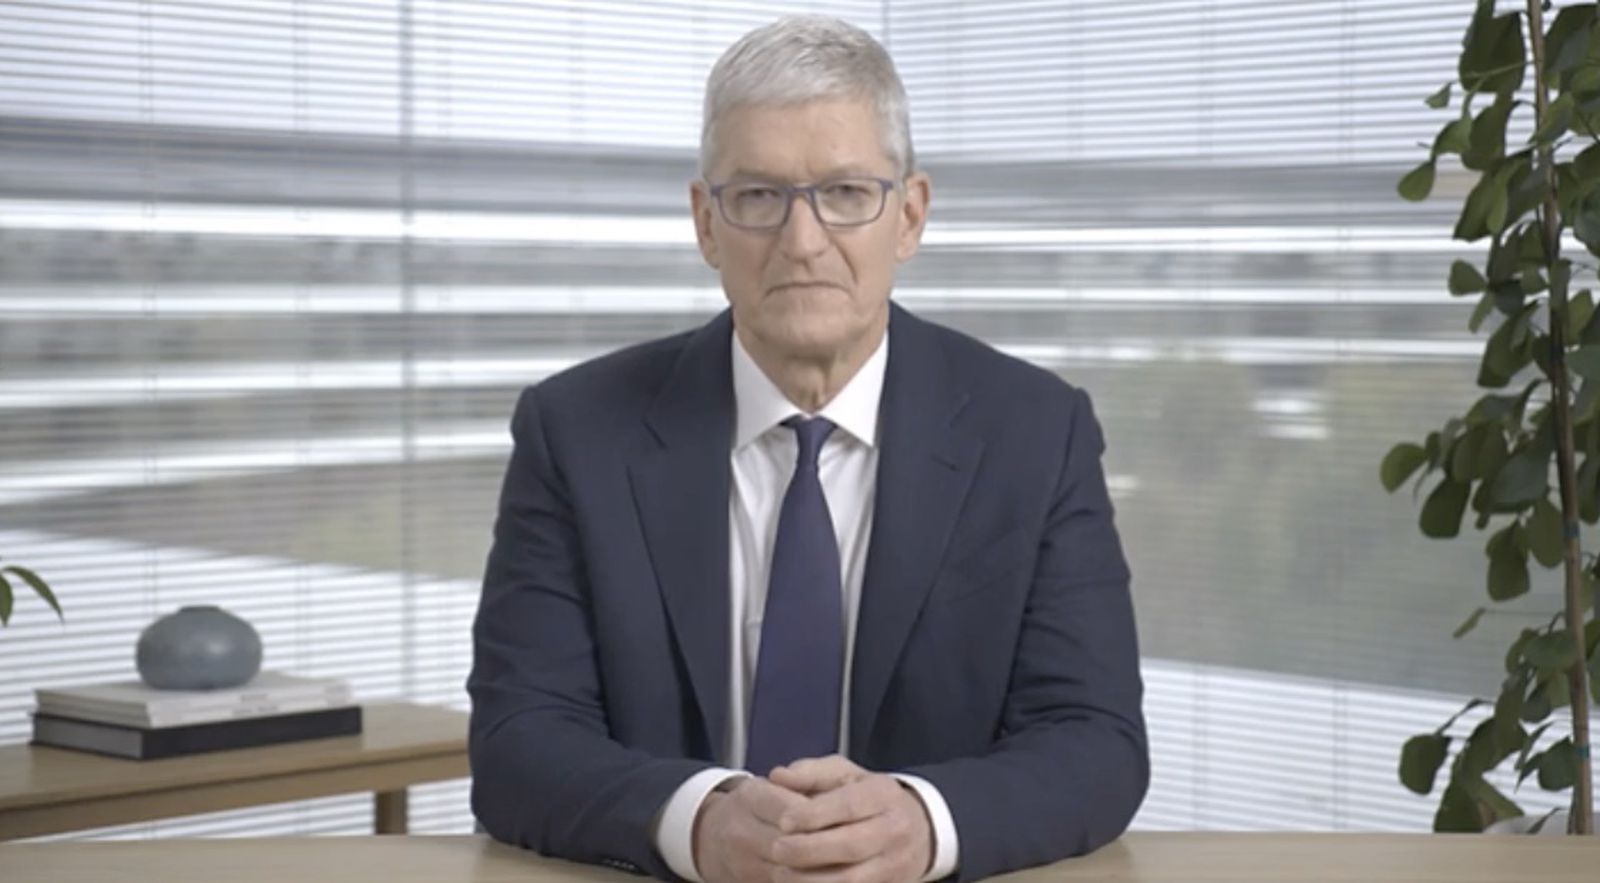 Apple CEO Tim Cook: Privacy is “One of the Most Important Issues of the Century”